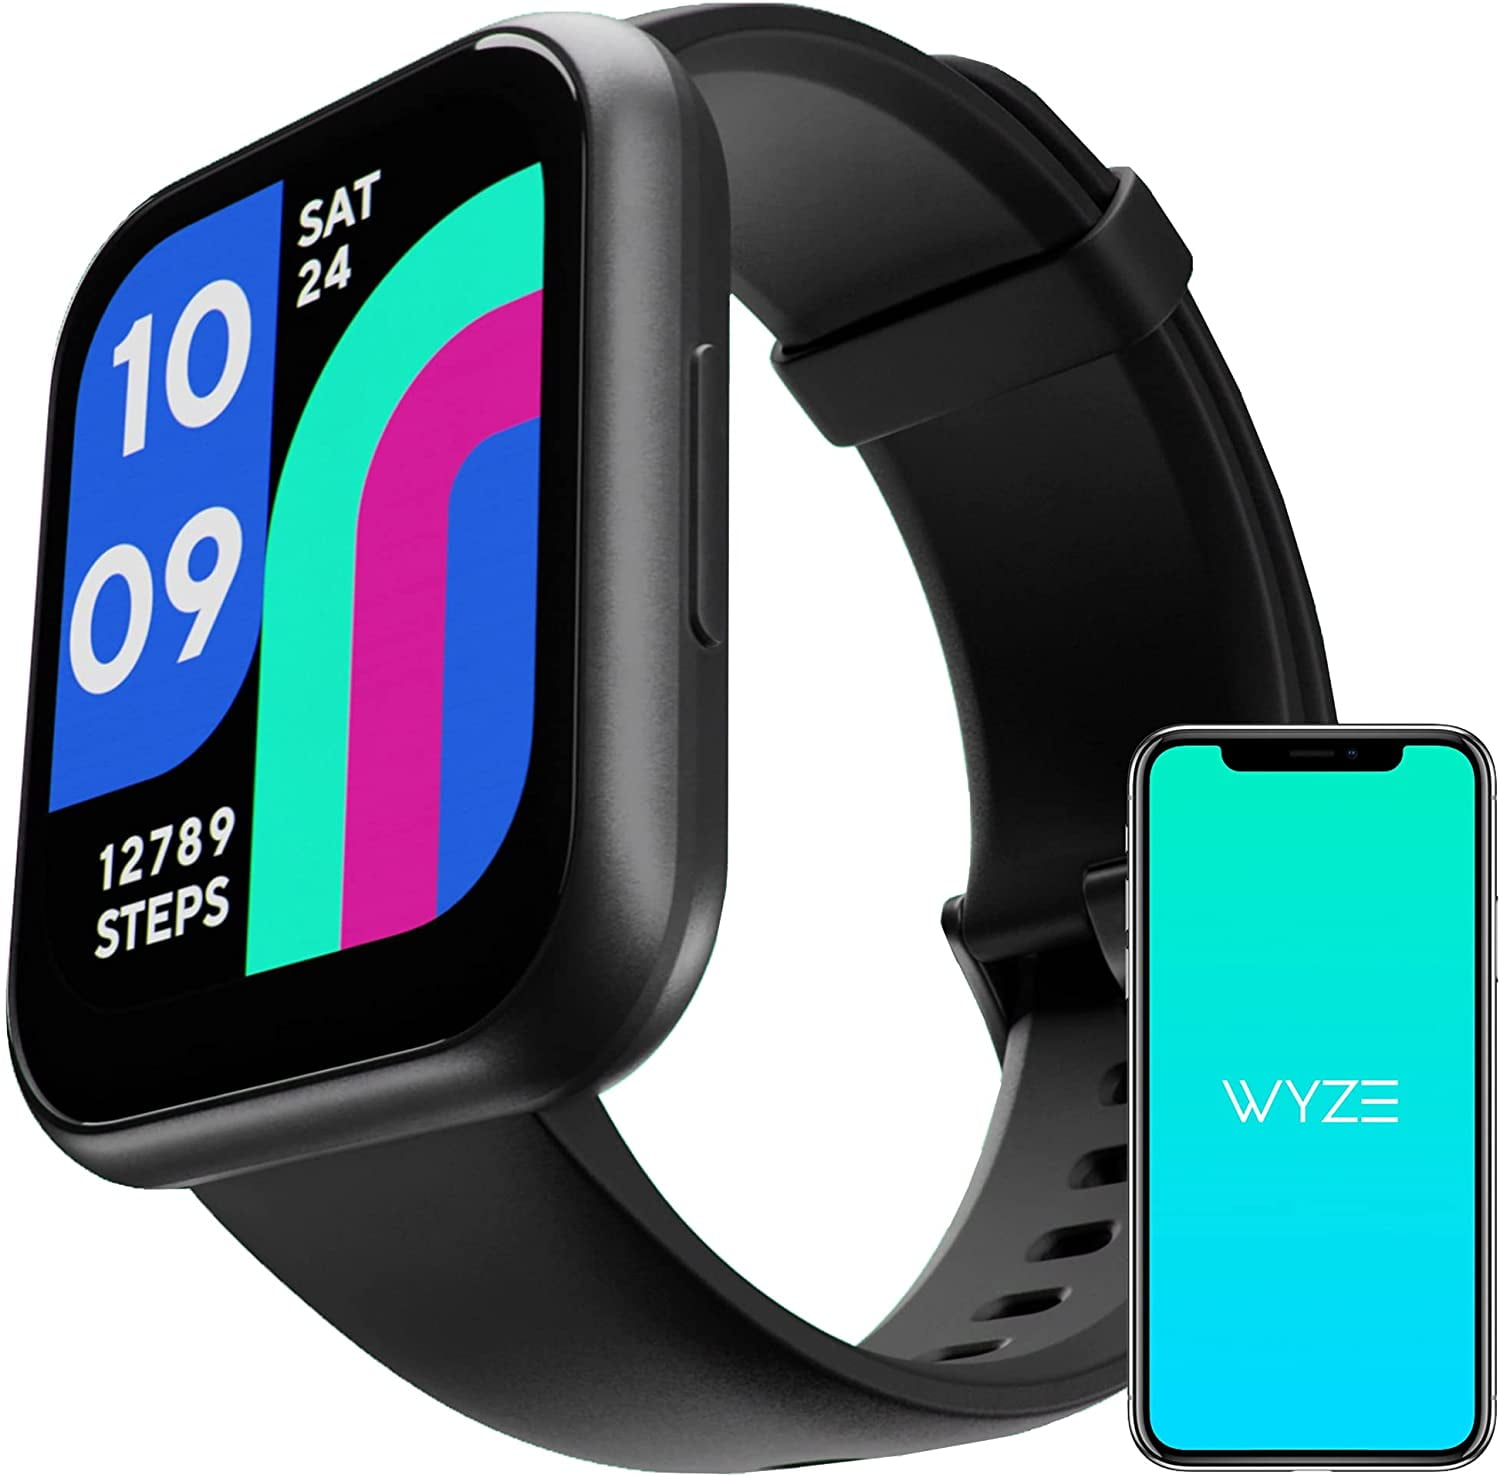 Tag telefonen George Bernard Hold sammen med Wyze Health and Wellness Smart Watch for Monitoring Heart Rate, Blood  Oxygen levels, Sleep Monitoring and Fitness Tracking for Men and Women -  Walmart.com